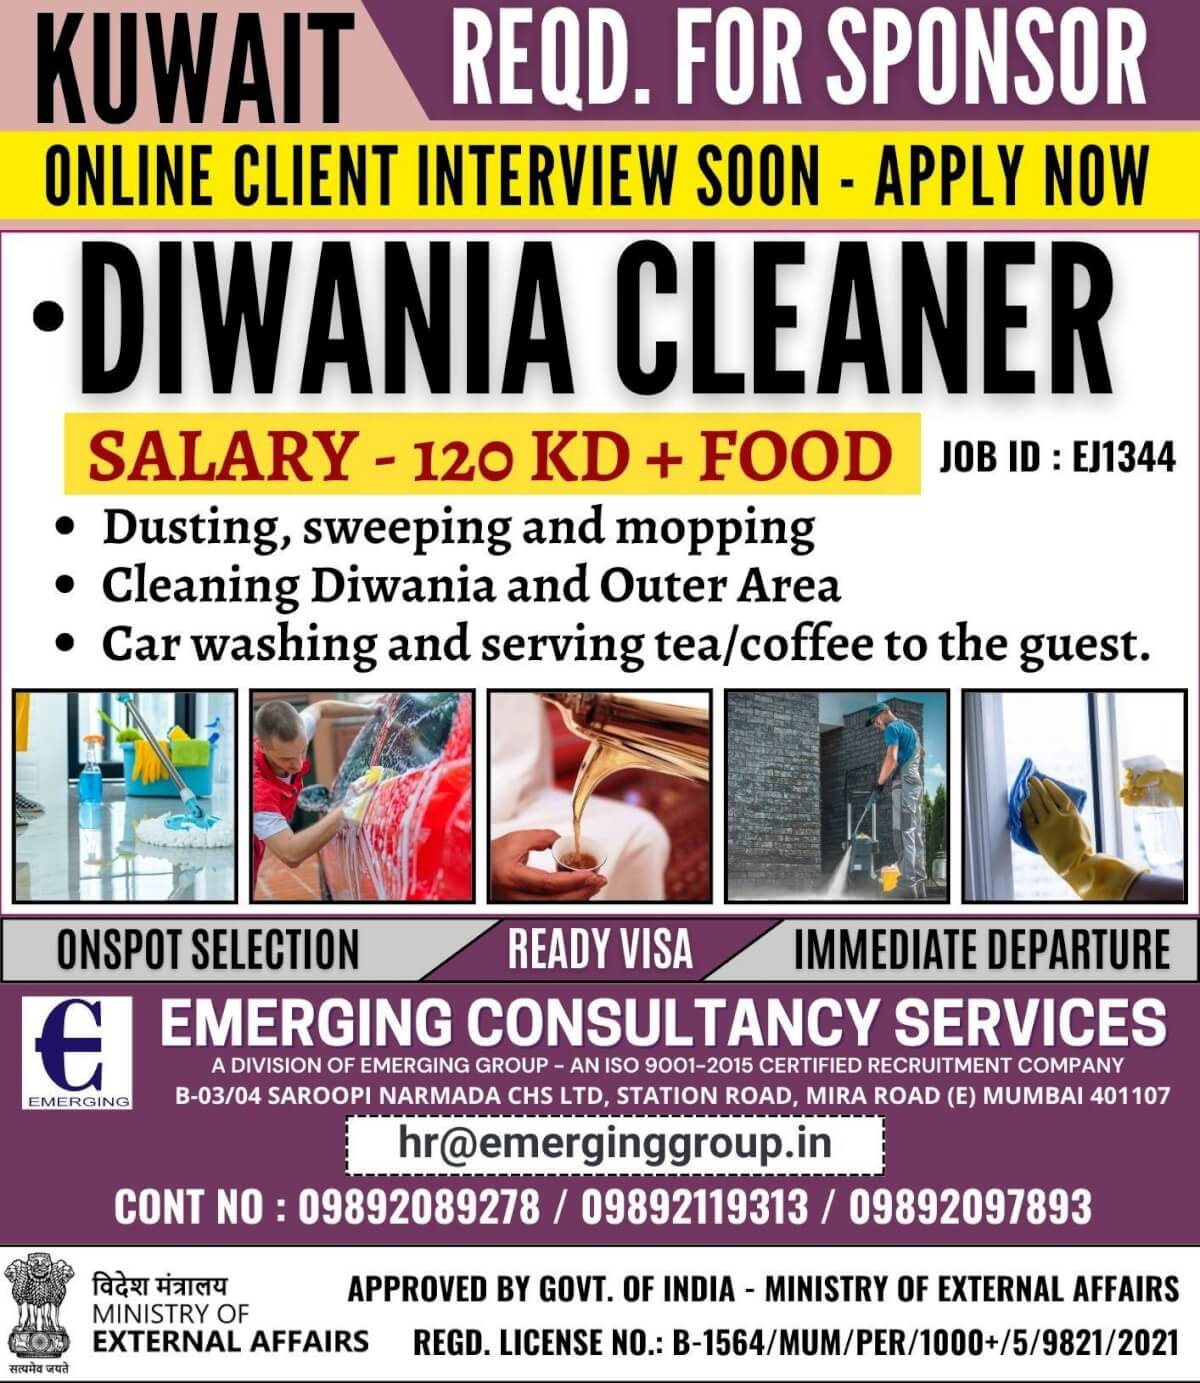 URGENT REQUIRED DIWANIA CLEANER FOR SPONSOR IN KUWAIT